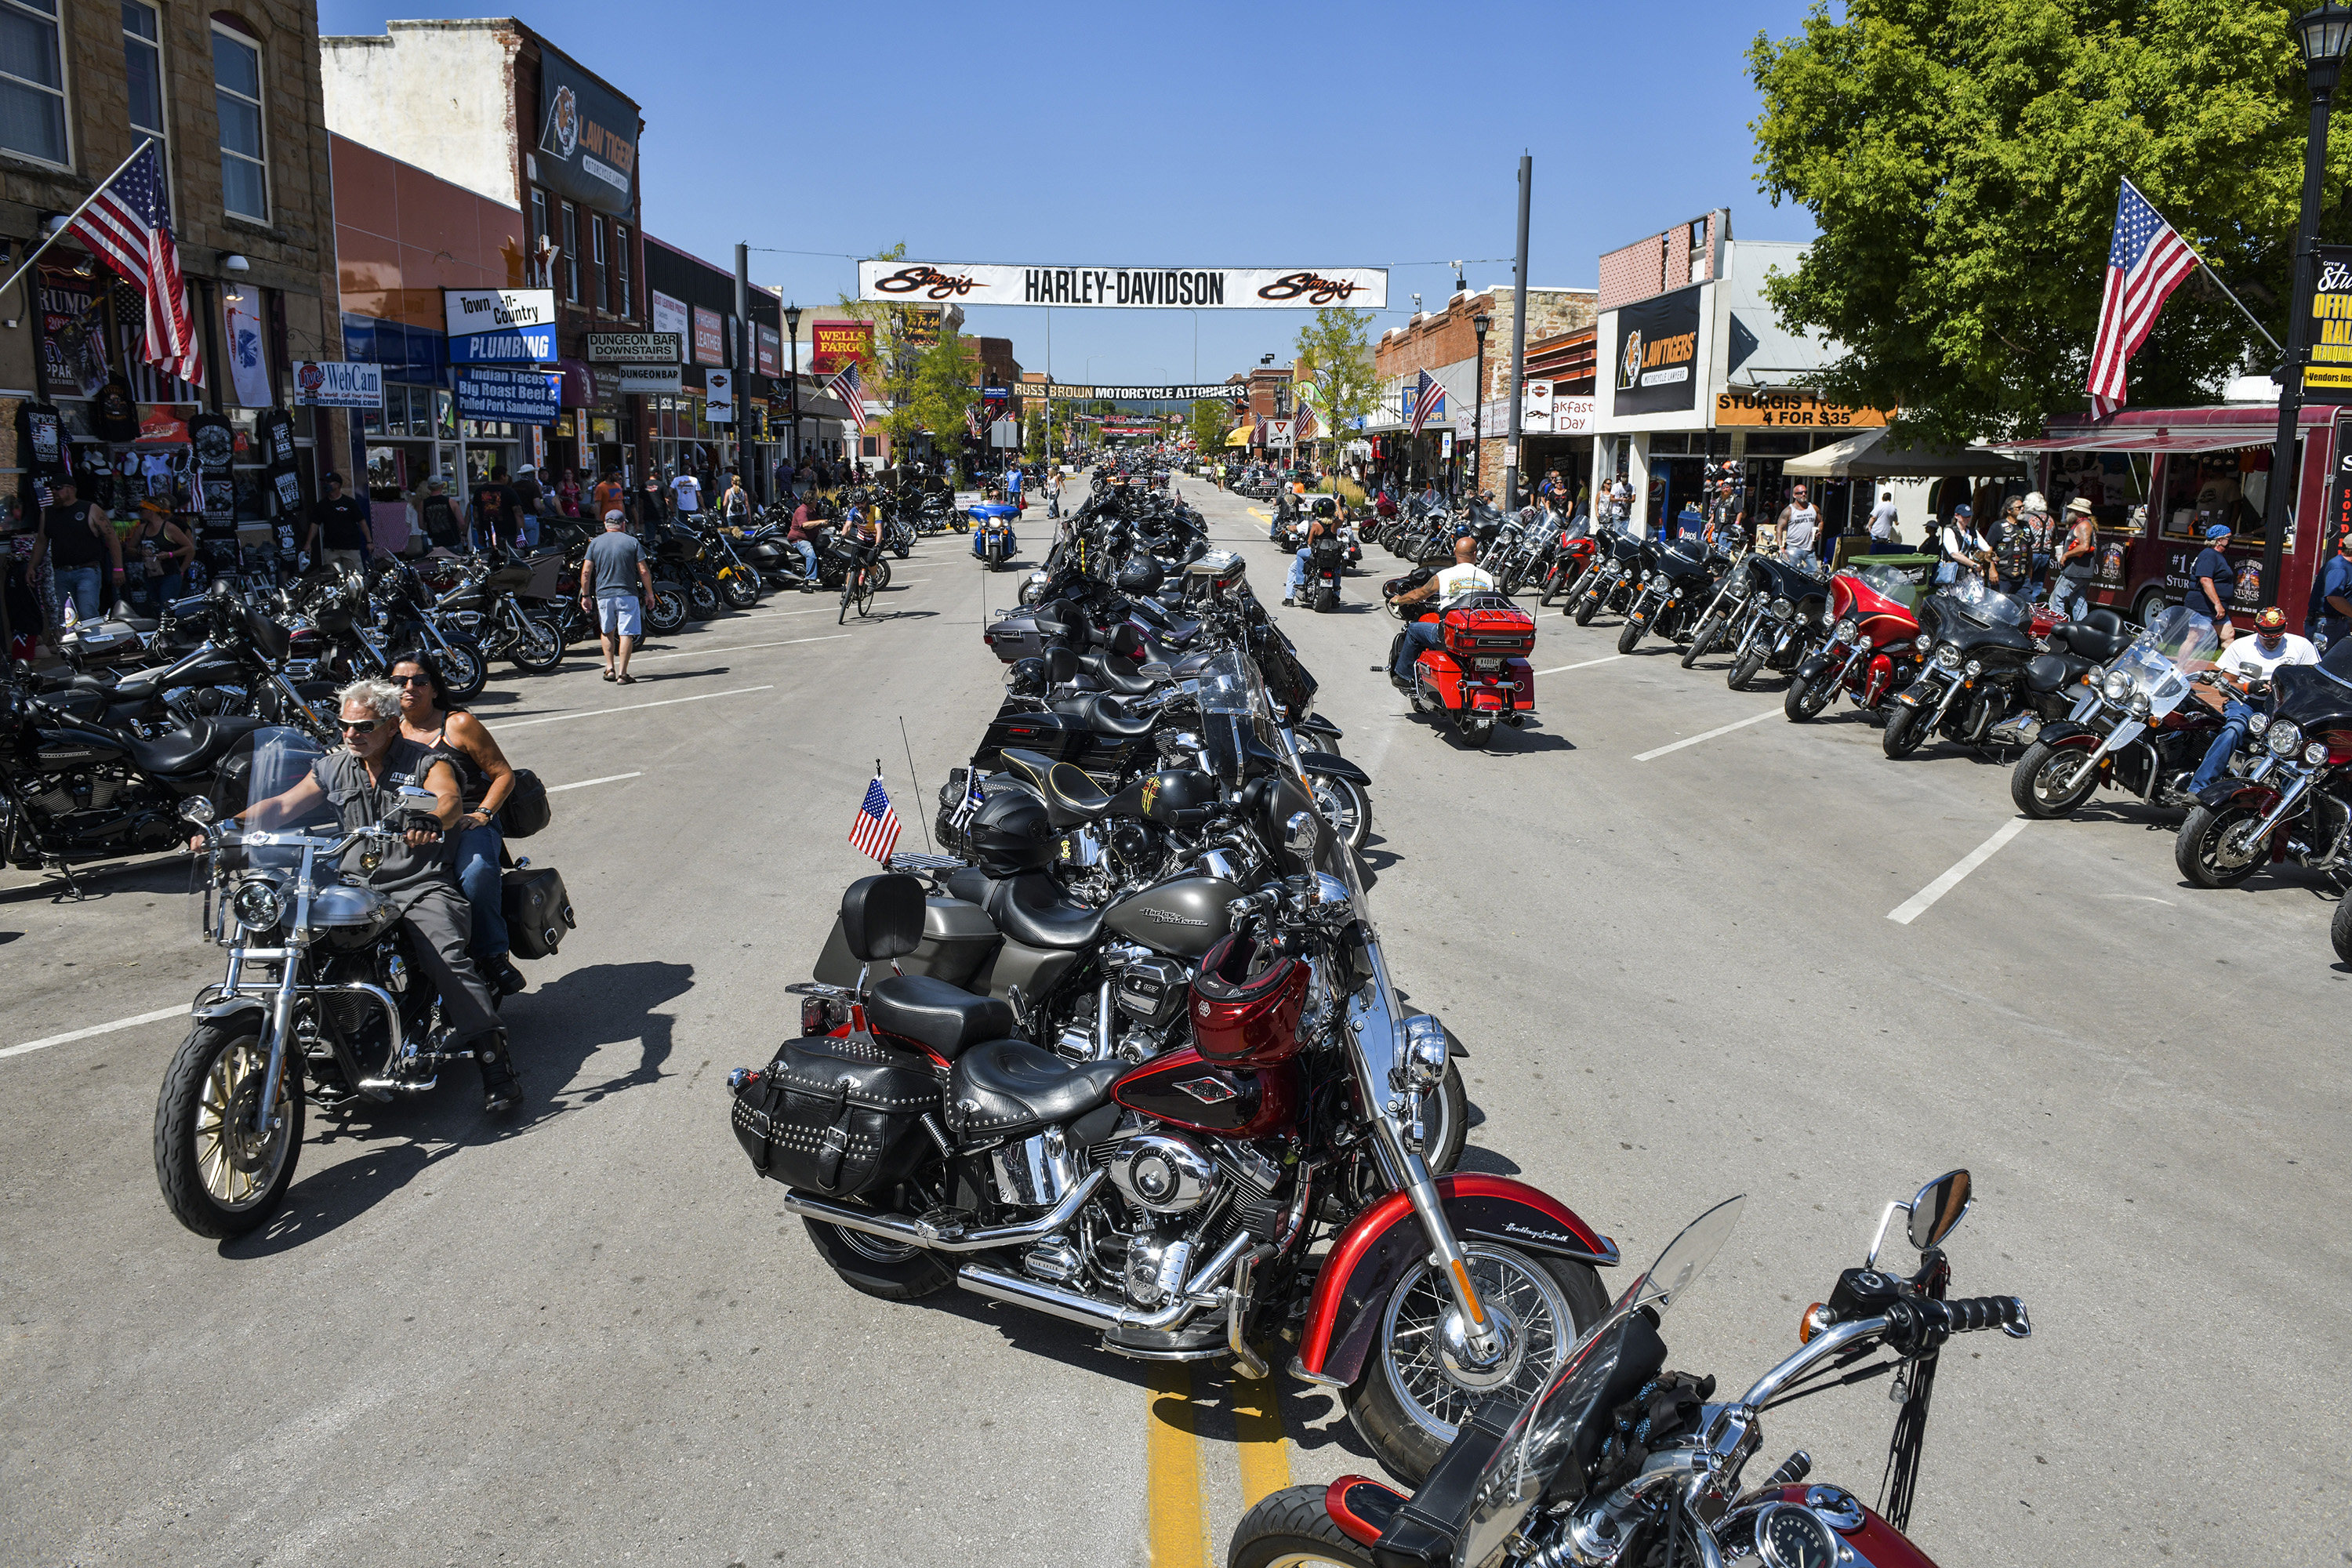 Motorcyclists ride down Main Street during the 2020 Sturgis Motorcycle Rally in Sturgis, South Dakota. Photo: Michael Ciaglo/Getty Images/TNS